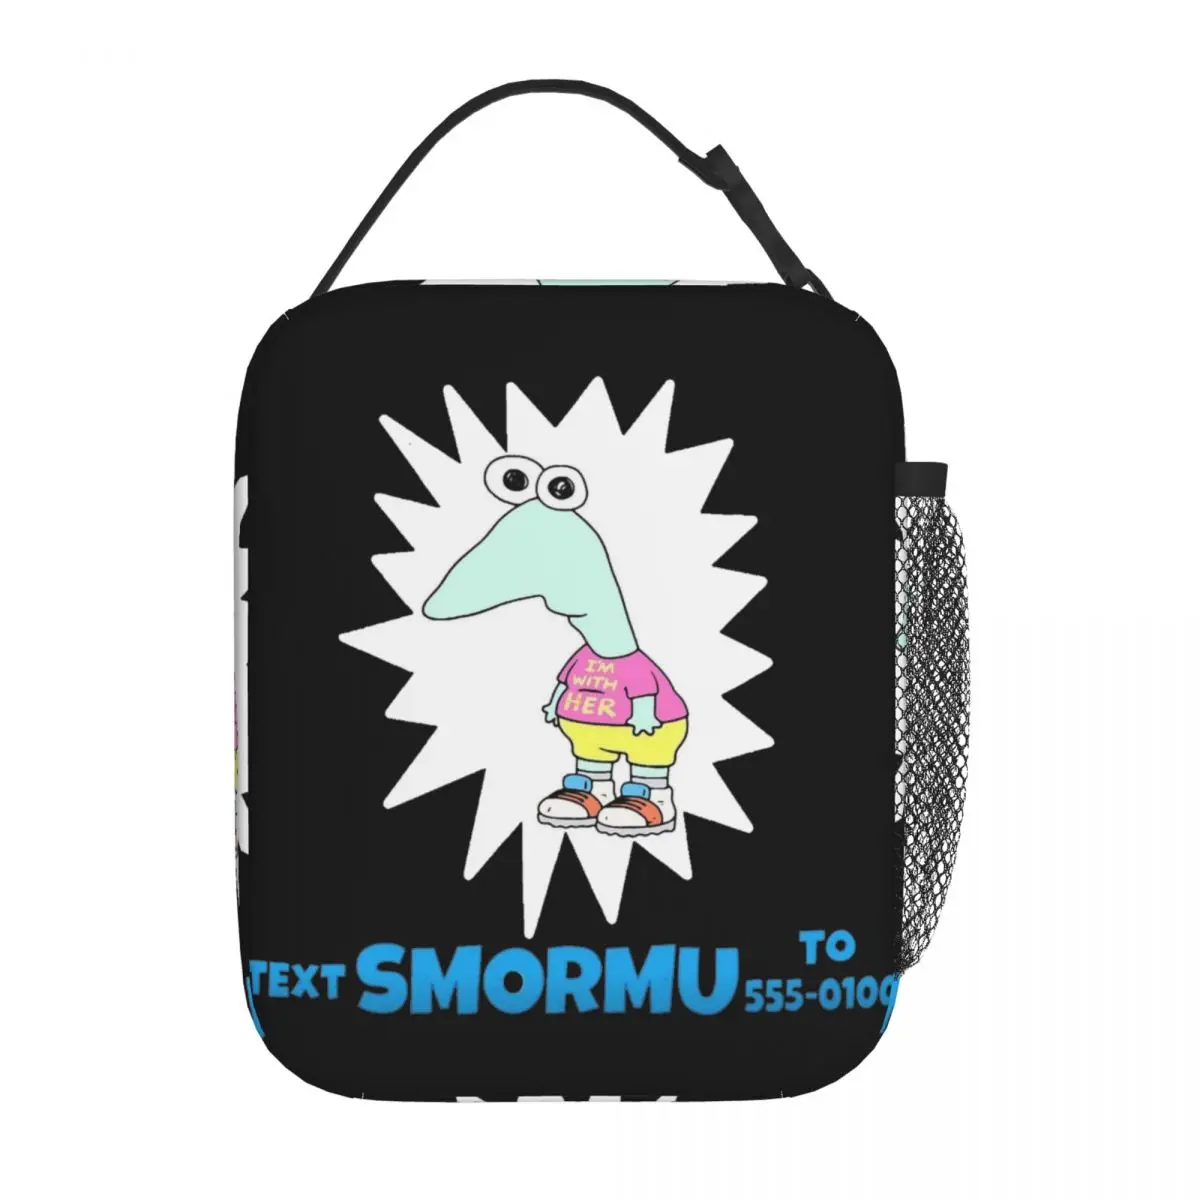 

Funny Smiling Friends Cartoon Insulated Lunch Bags For Outdoor Smormu Food Storage Bag Portable Thermal Cooler Lunch Boxes